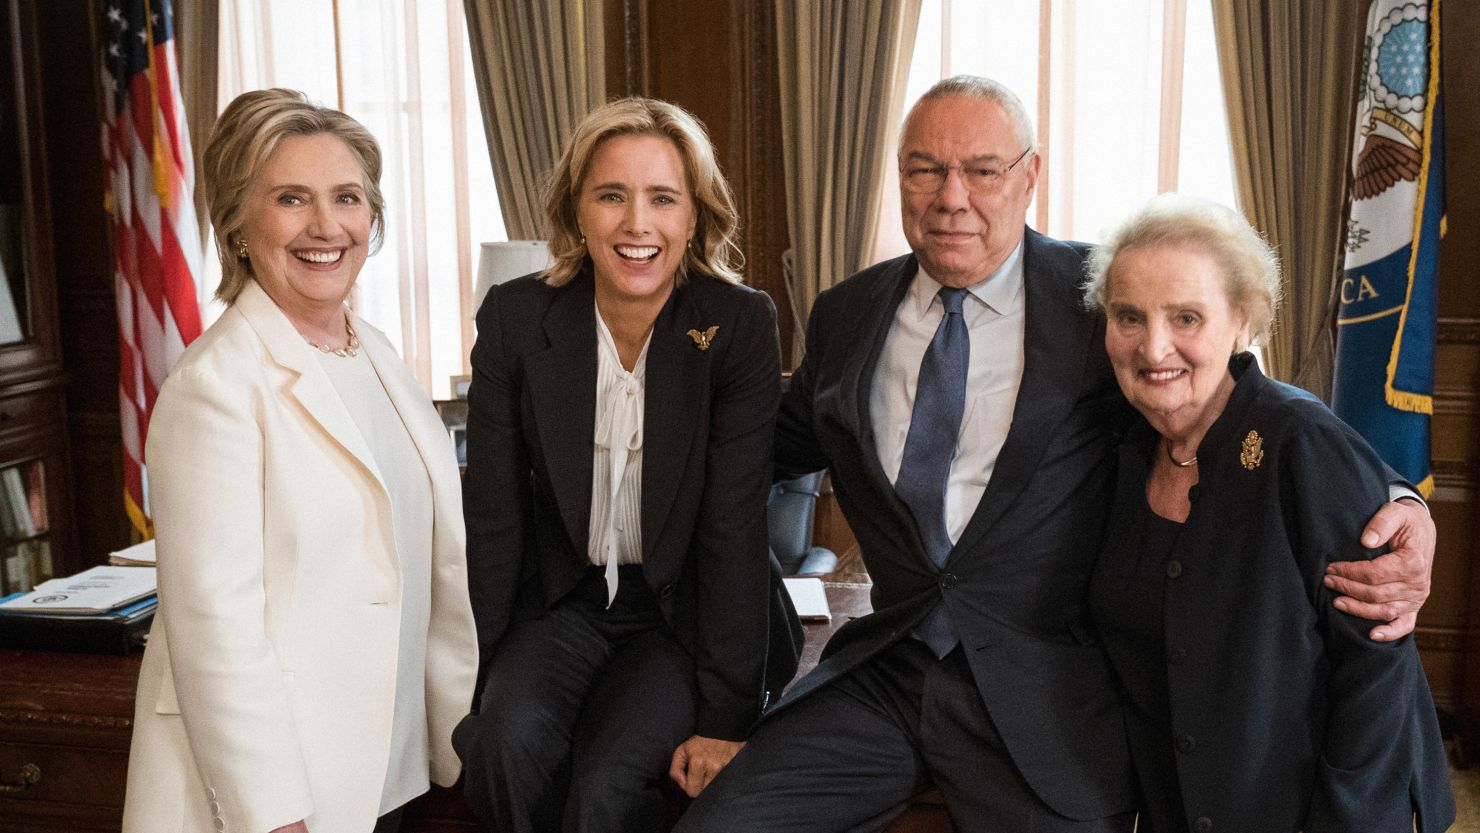 Former Secretaries of State Hillary Clinton, General Colin Powell and Madeleine Albright joined Téa Leoni on set at Madam Secretary.